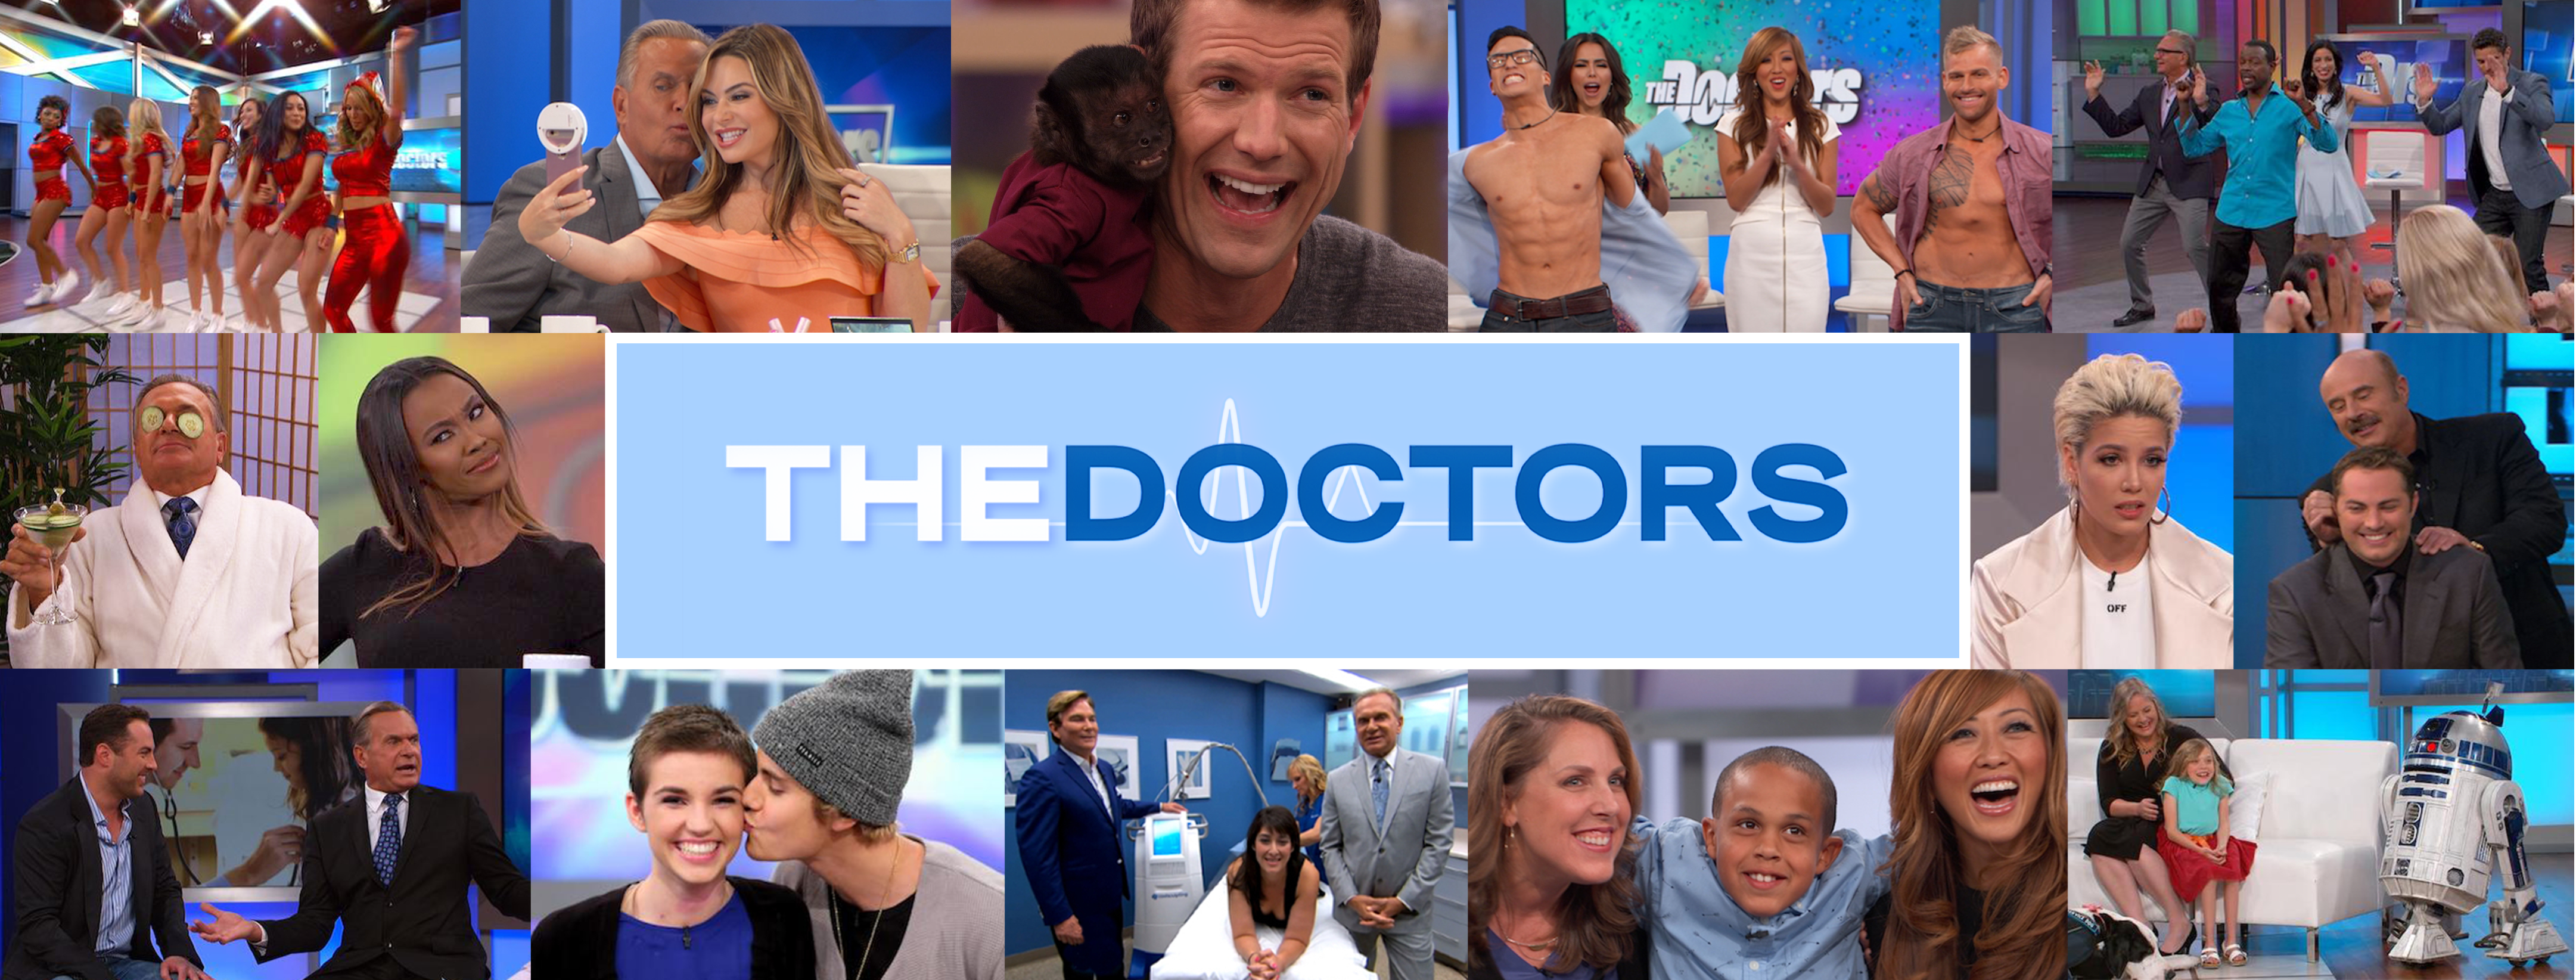 Dr Sears Most Embarrassing Moment The Doctors Tv Show